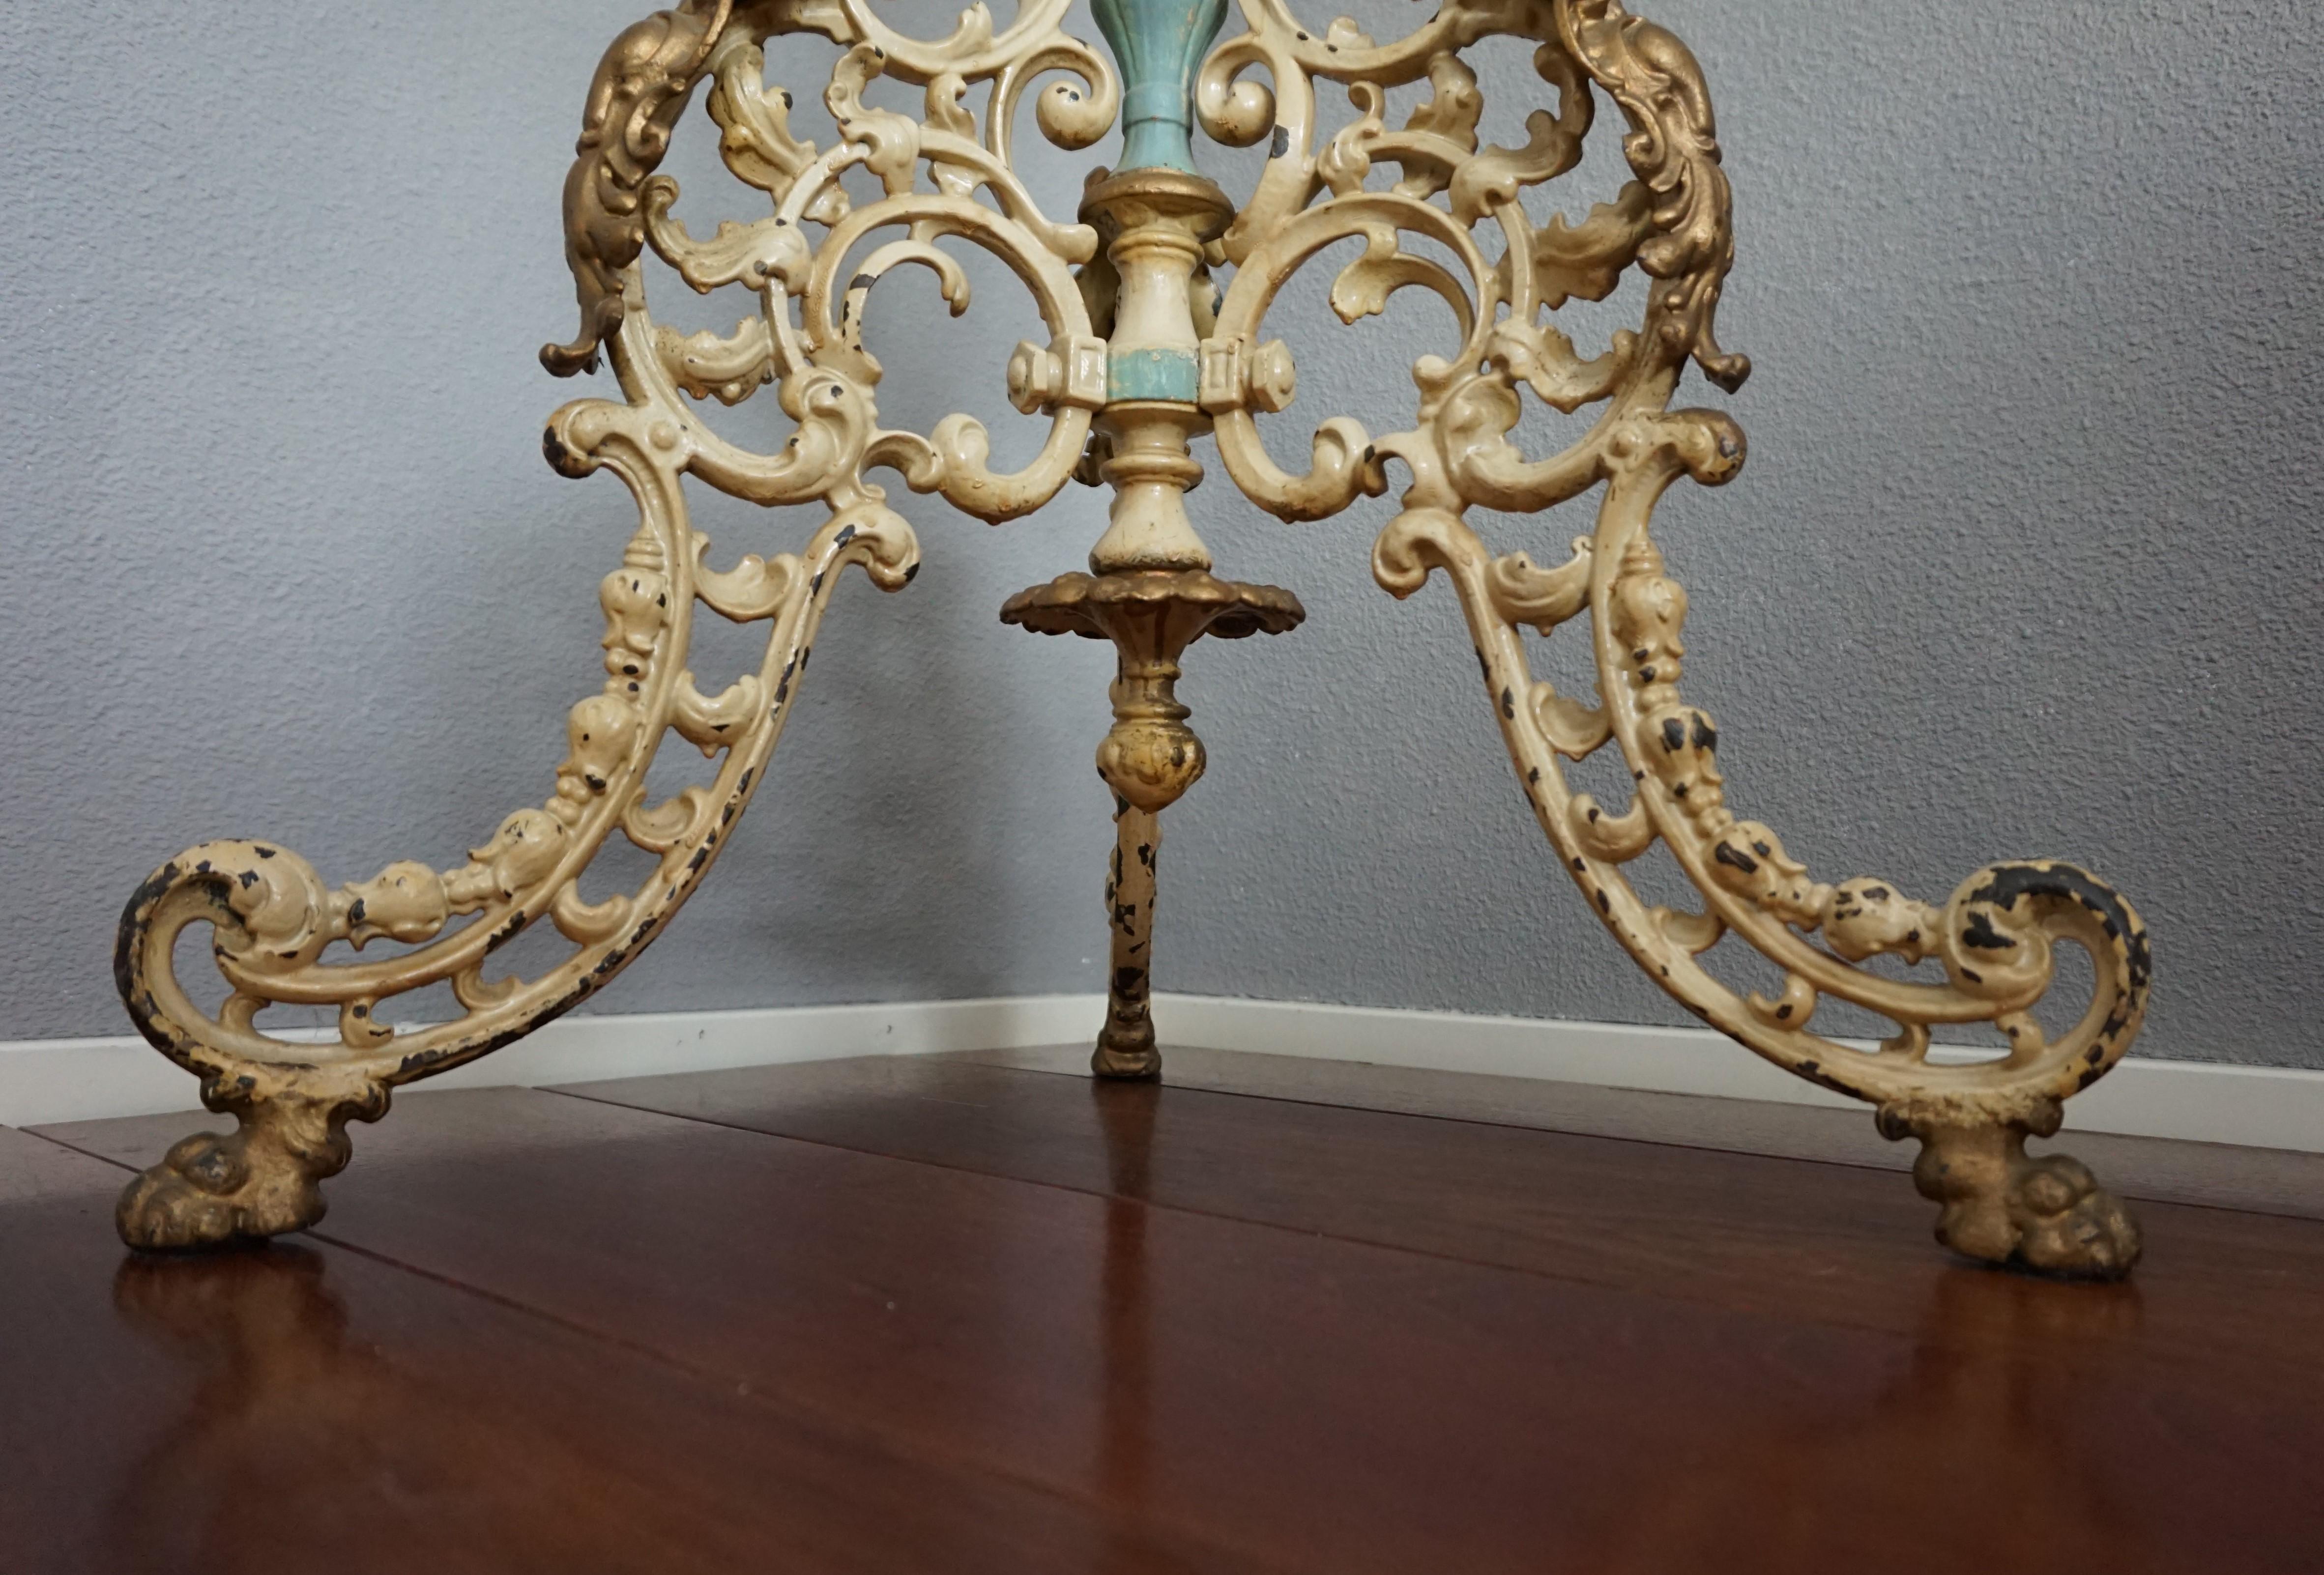 Brass Antique and Painted Cast Iron Baroque Revival Floor Lamp w. Putti Bust Sculpture For Sale